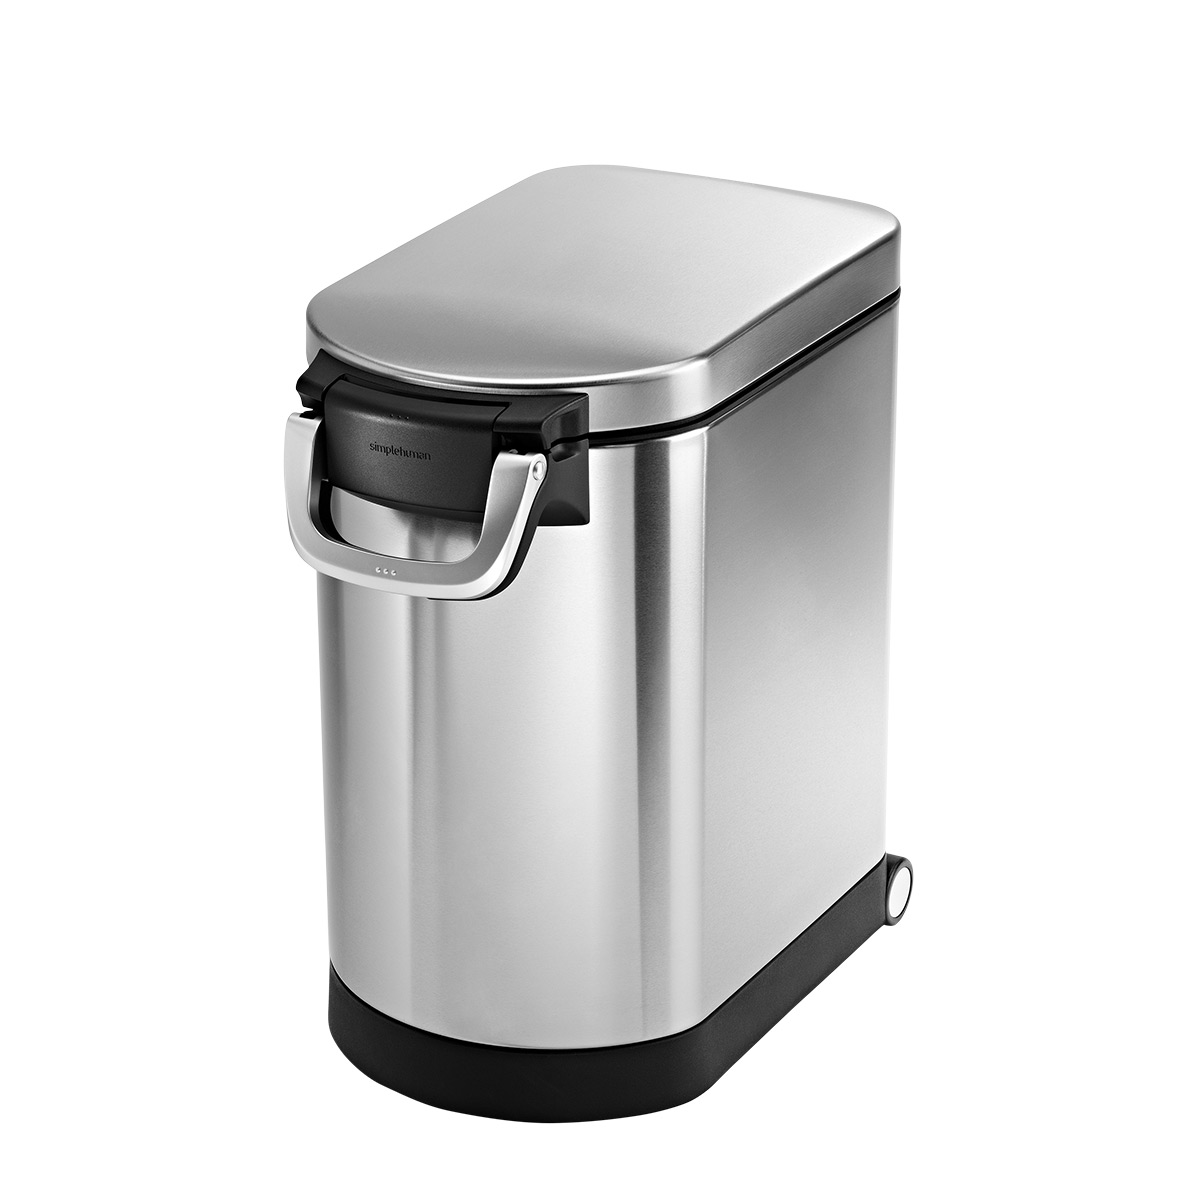 simplehuman 25-29 lb. Pet Food Container Stainless Steel